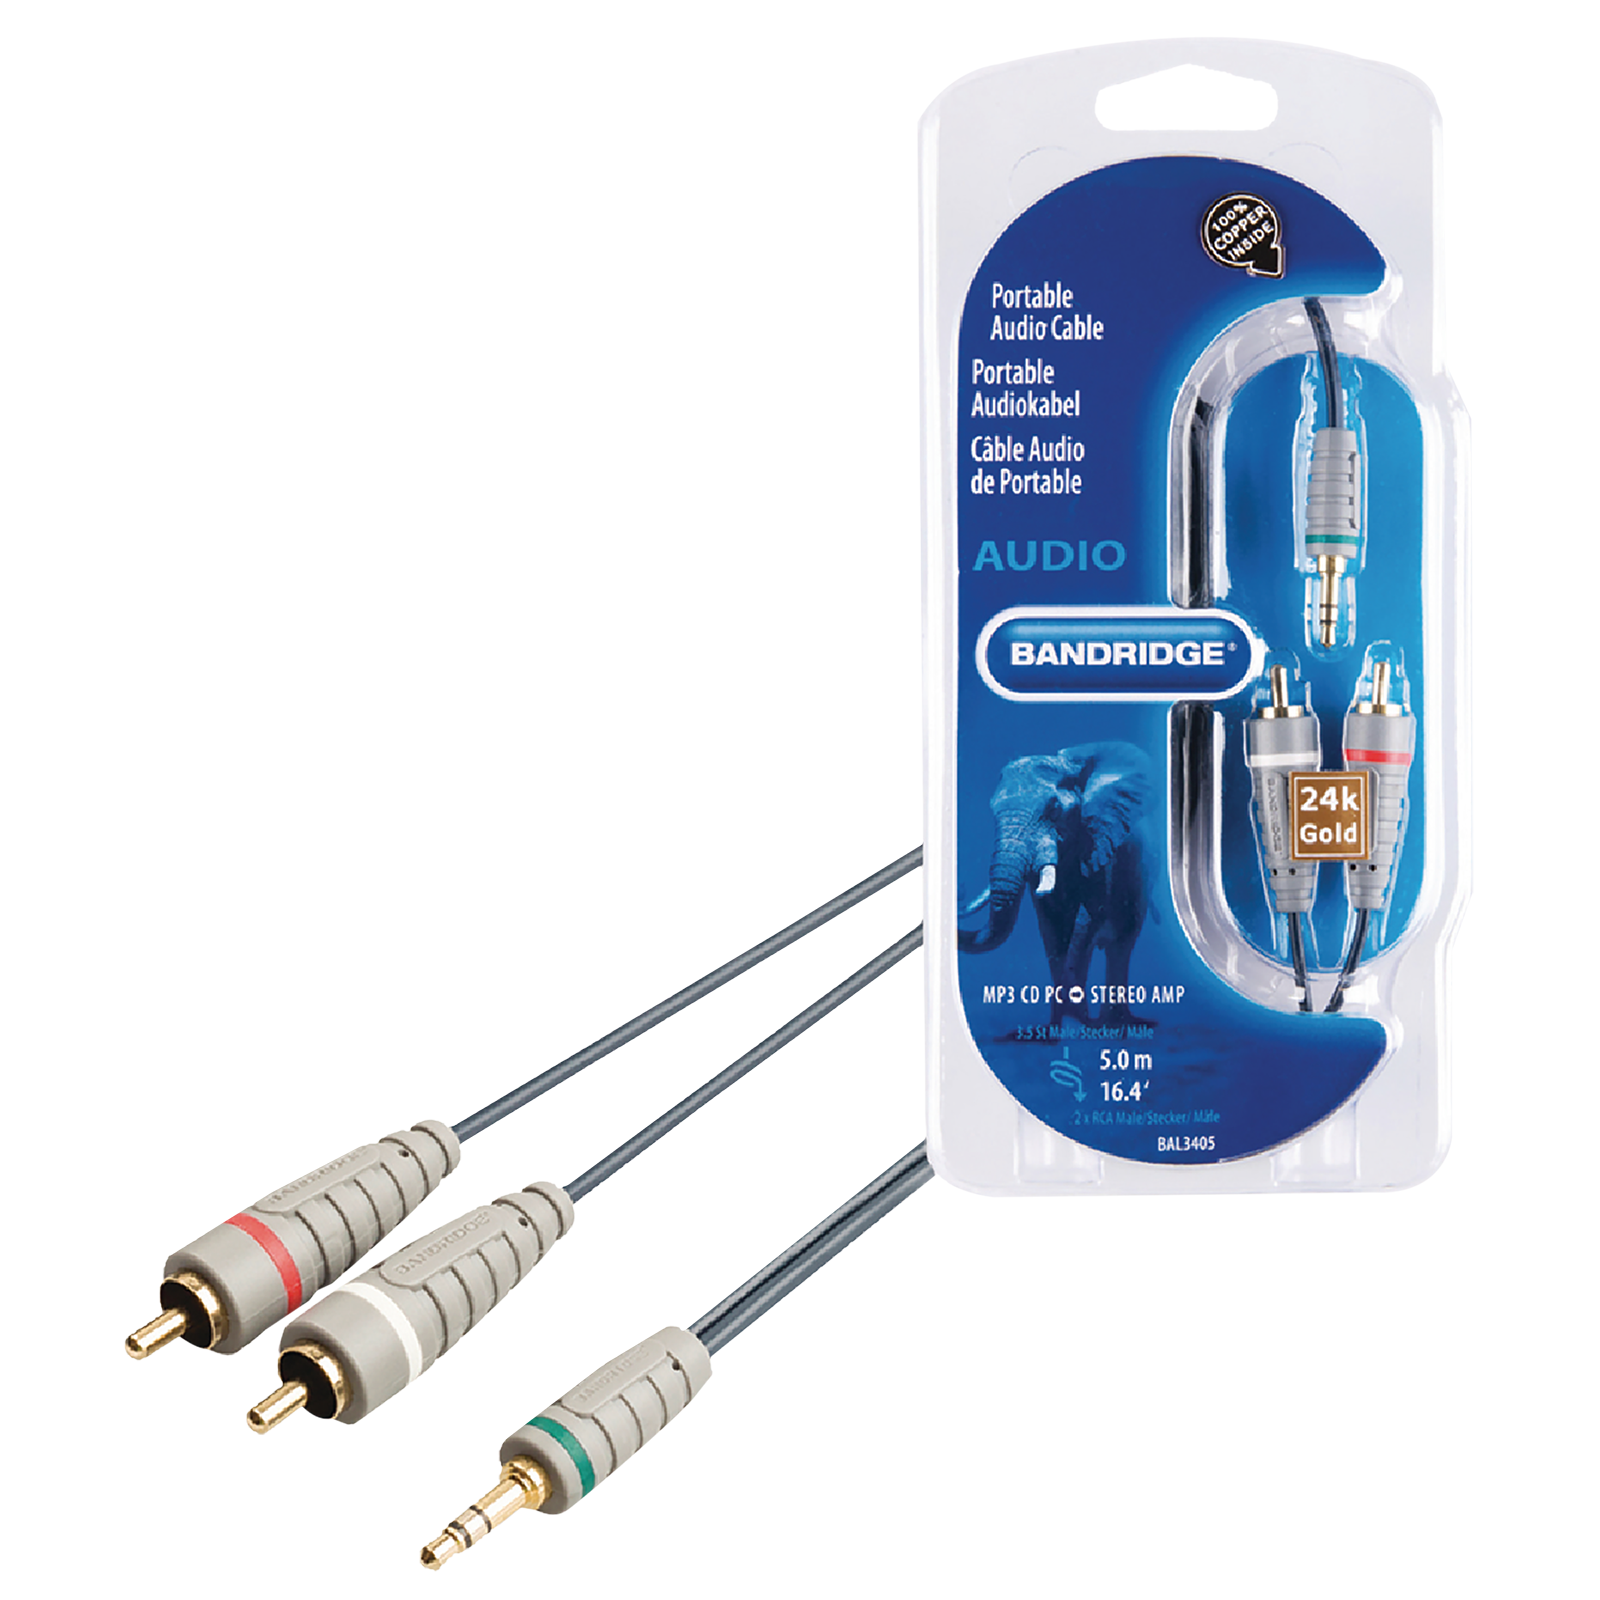 Bandridge BAL3405 PVC 5 Meter 3.5mm Stereo to RCA Audio Cable (24K Gold Plated, Blue)